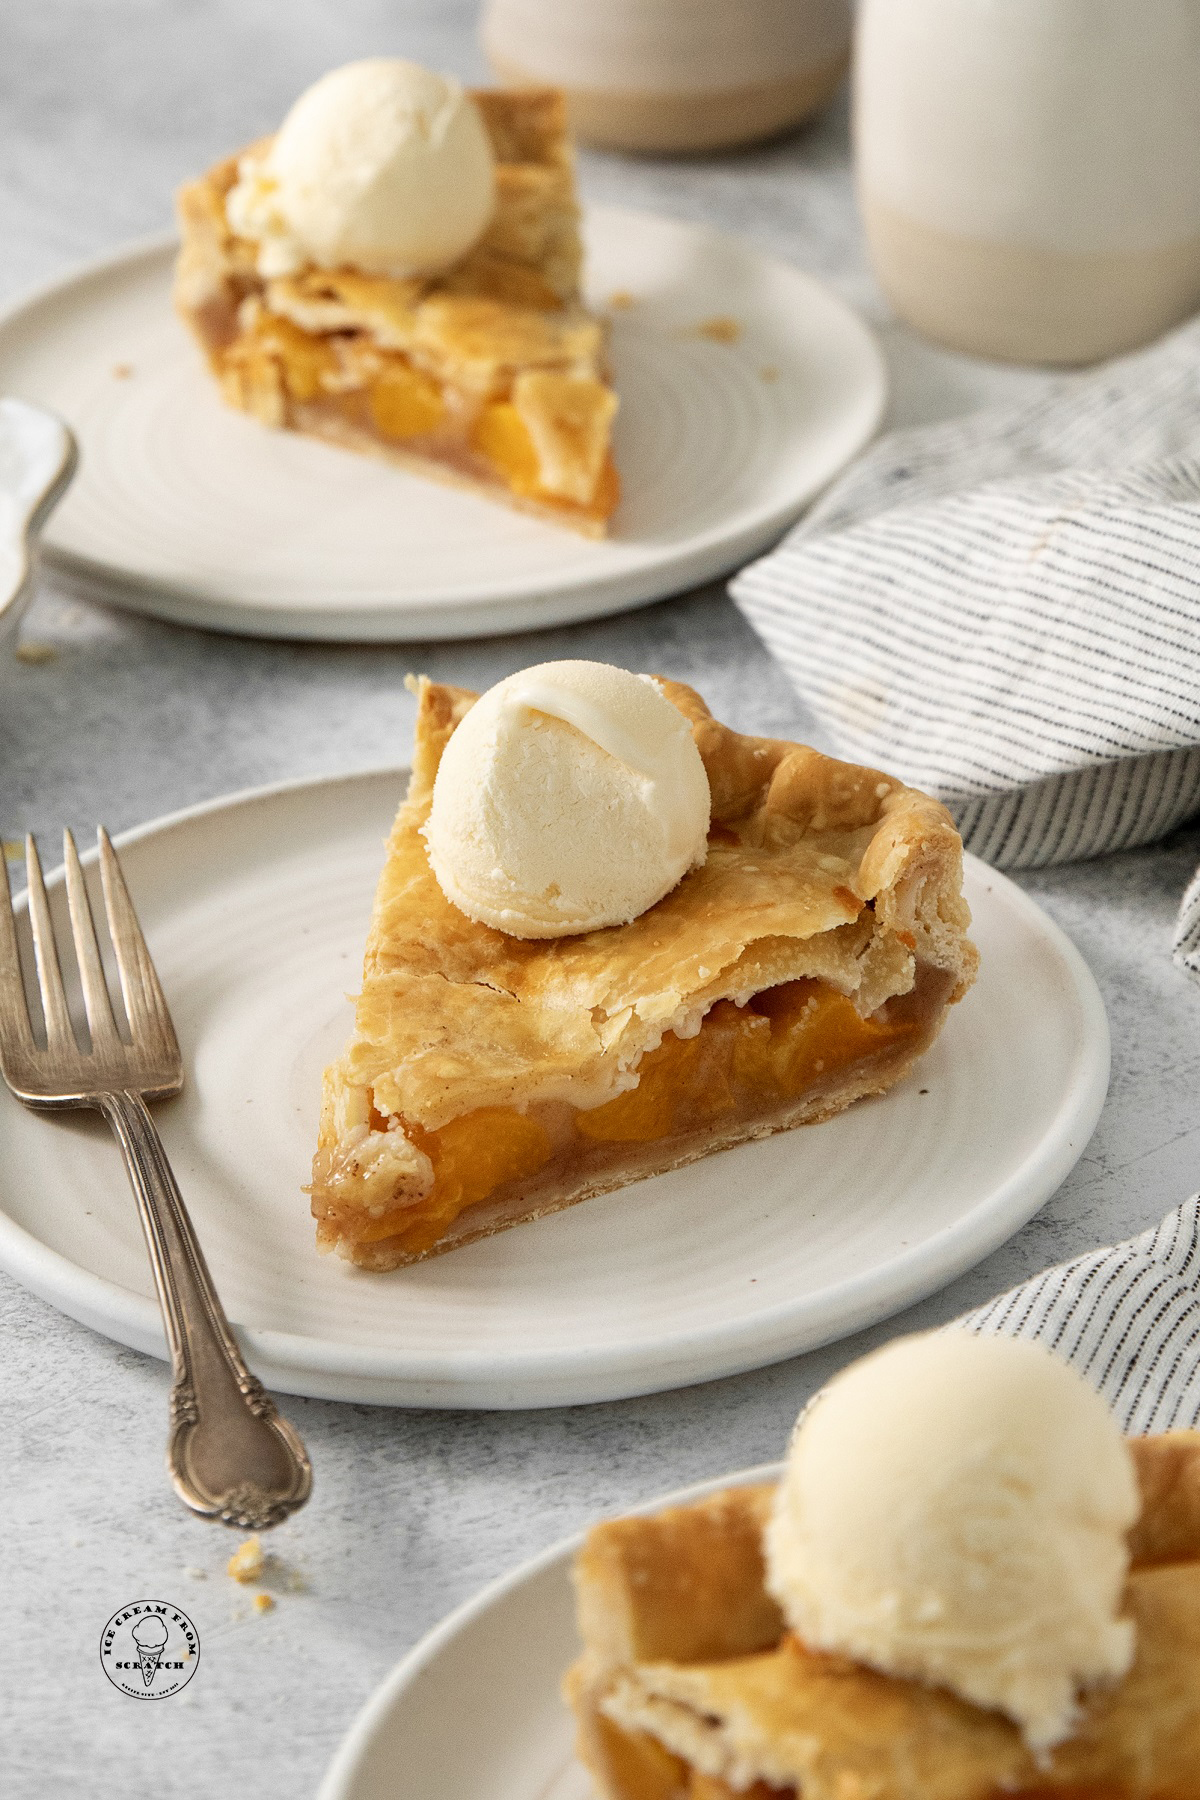 Slices of canned peach pie topped with vanilla ice cream.